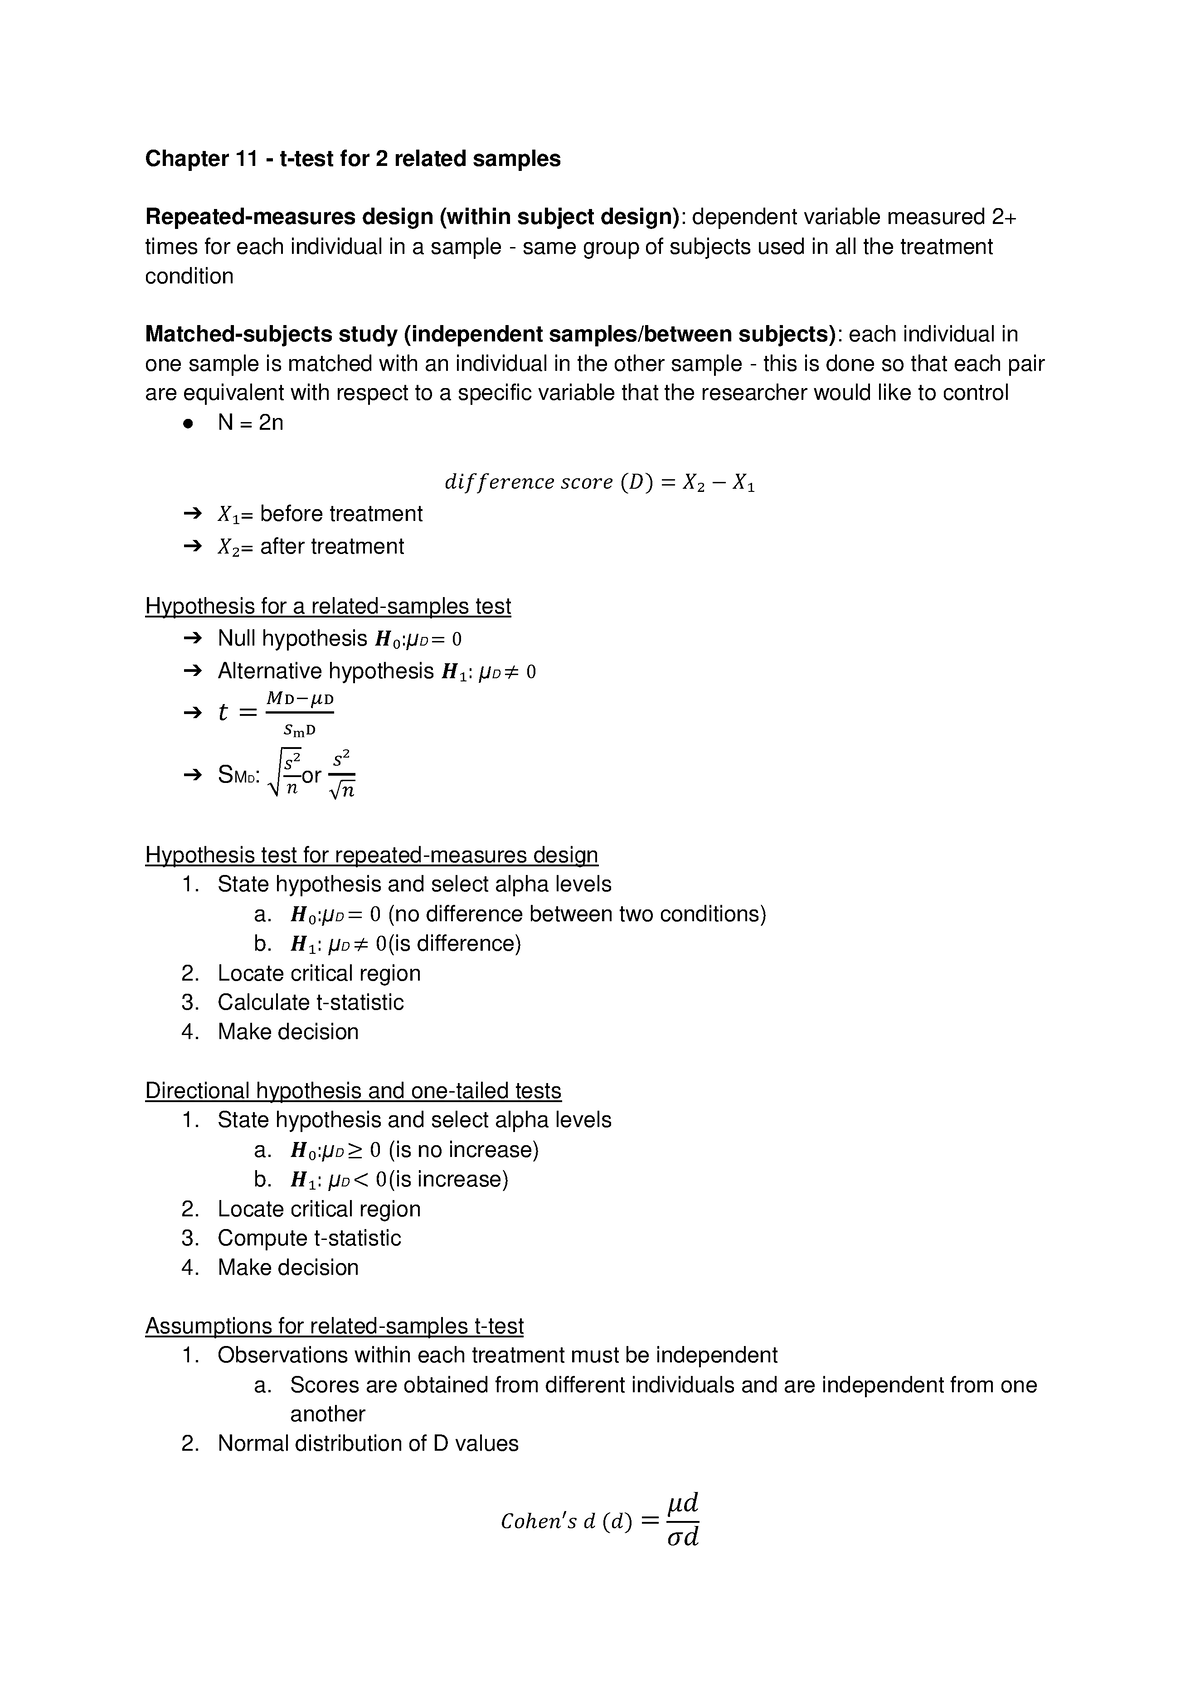 Chapter 11 - chap 11 lecture notes - Chapter 11 - t-test for 2 related ...